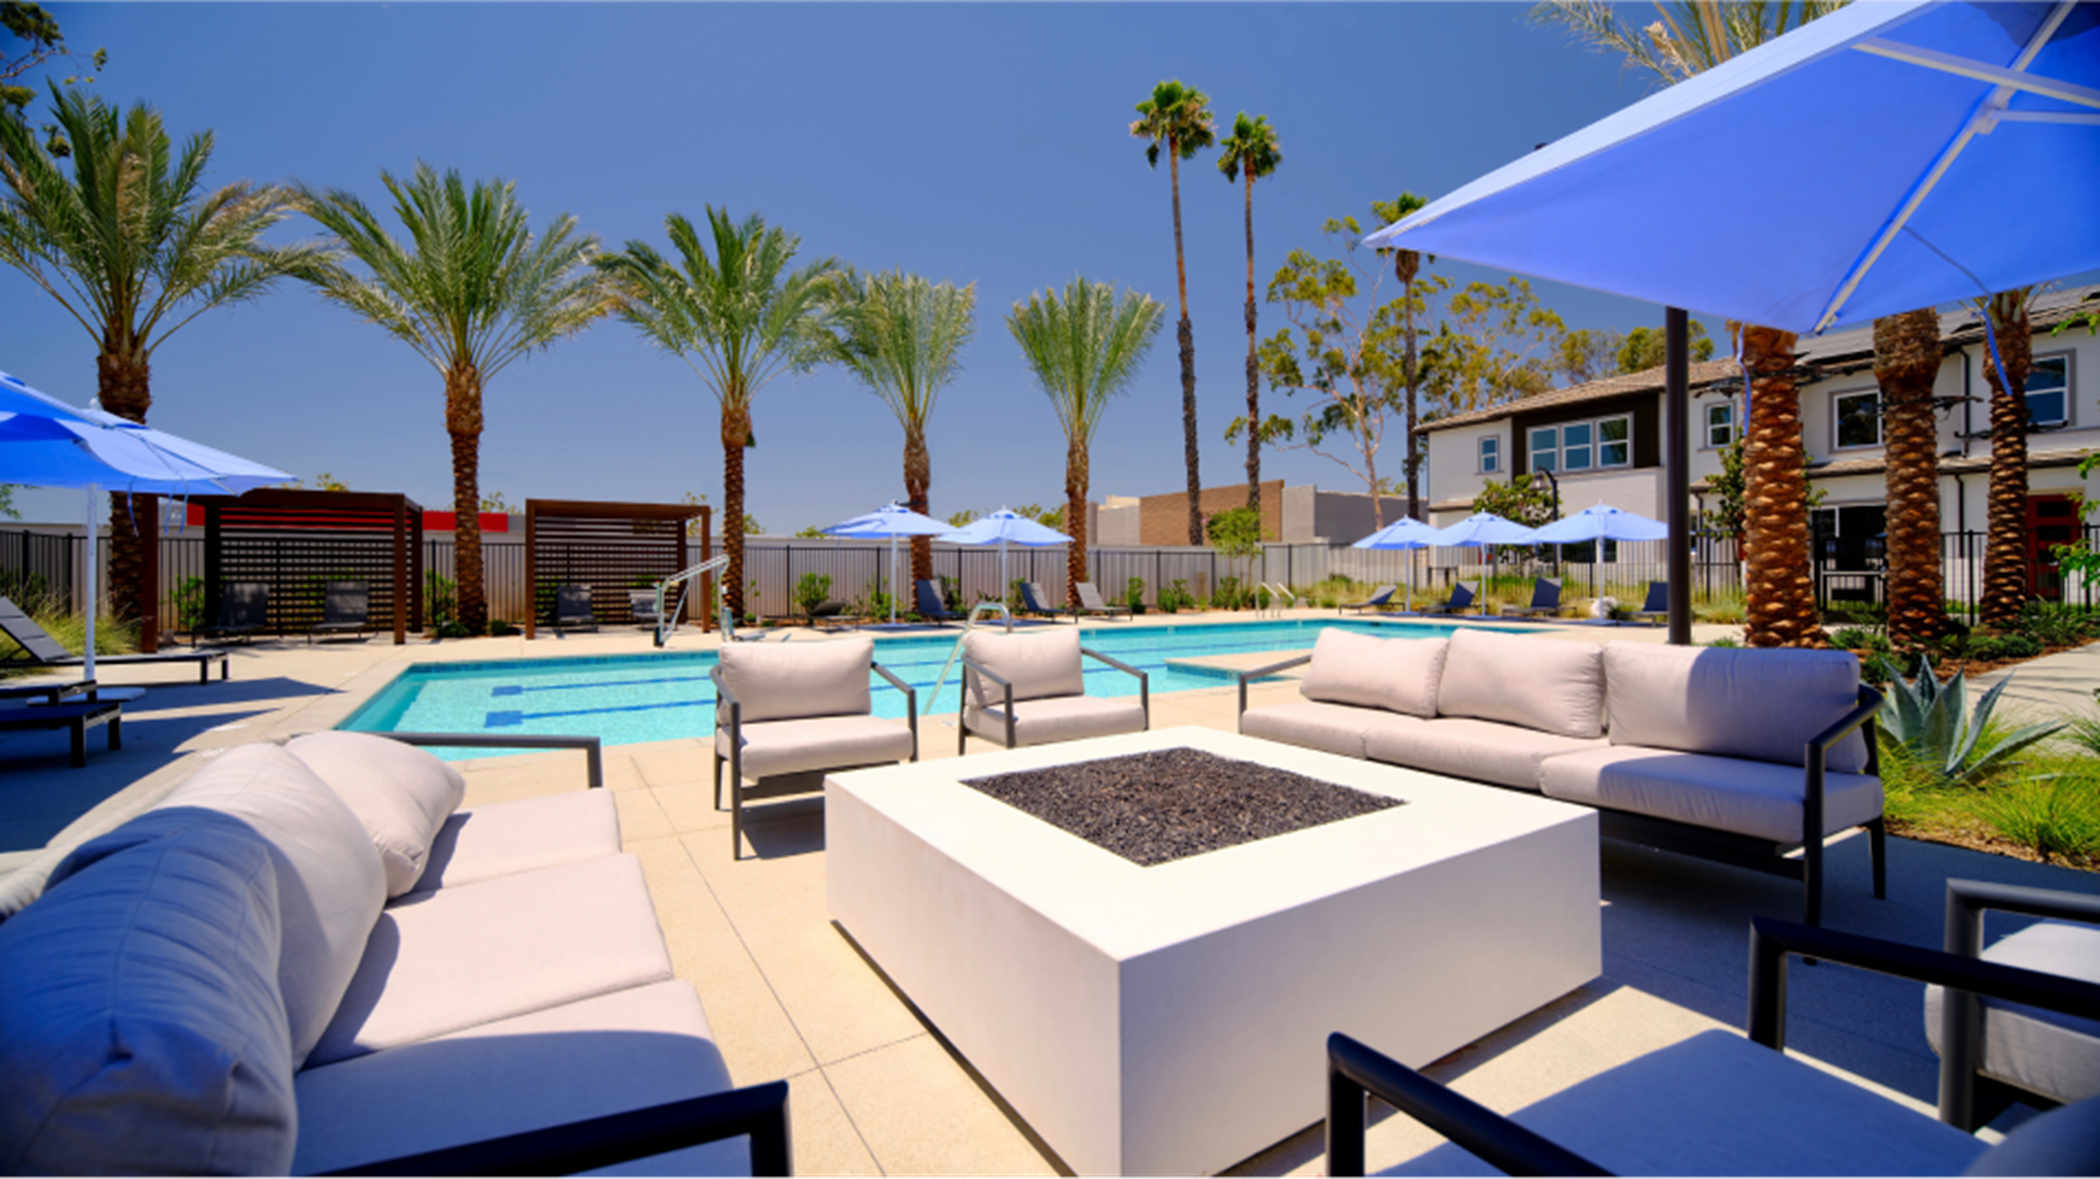 Lounge area by the pool